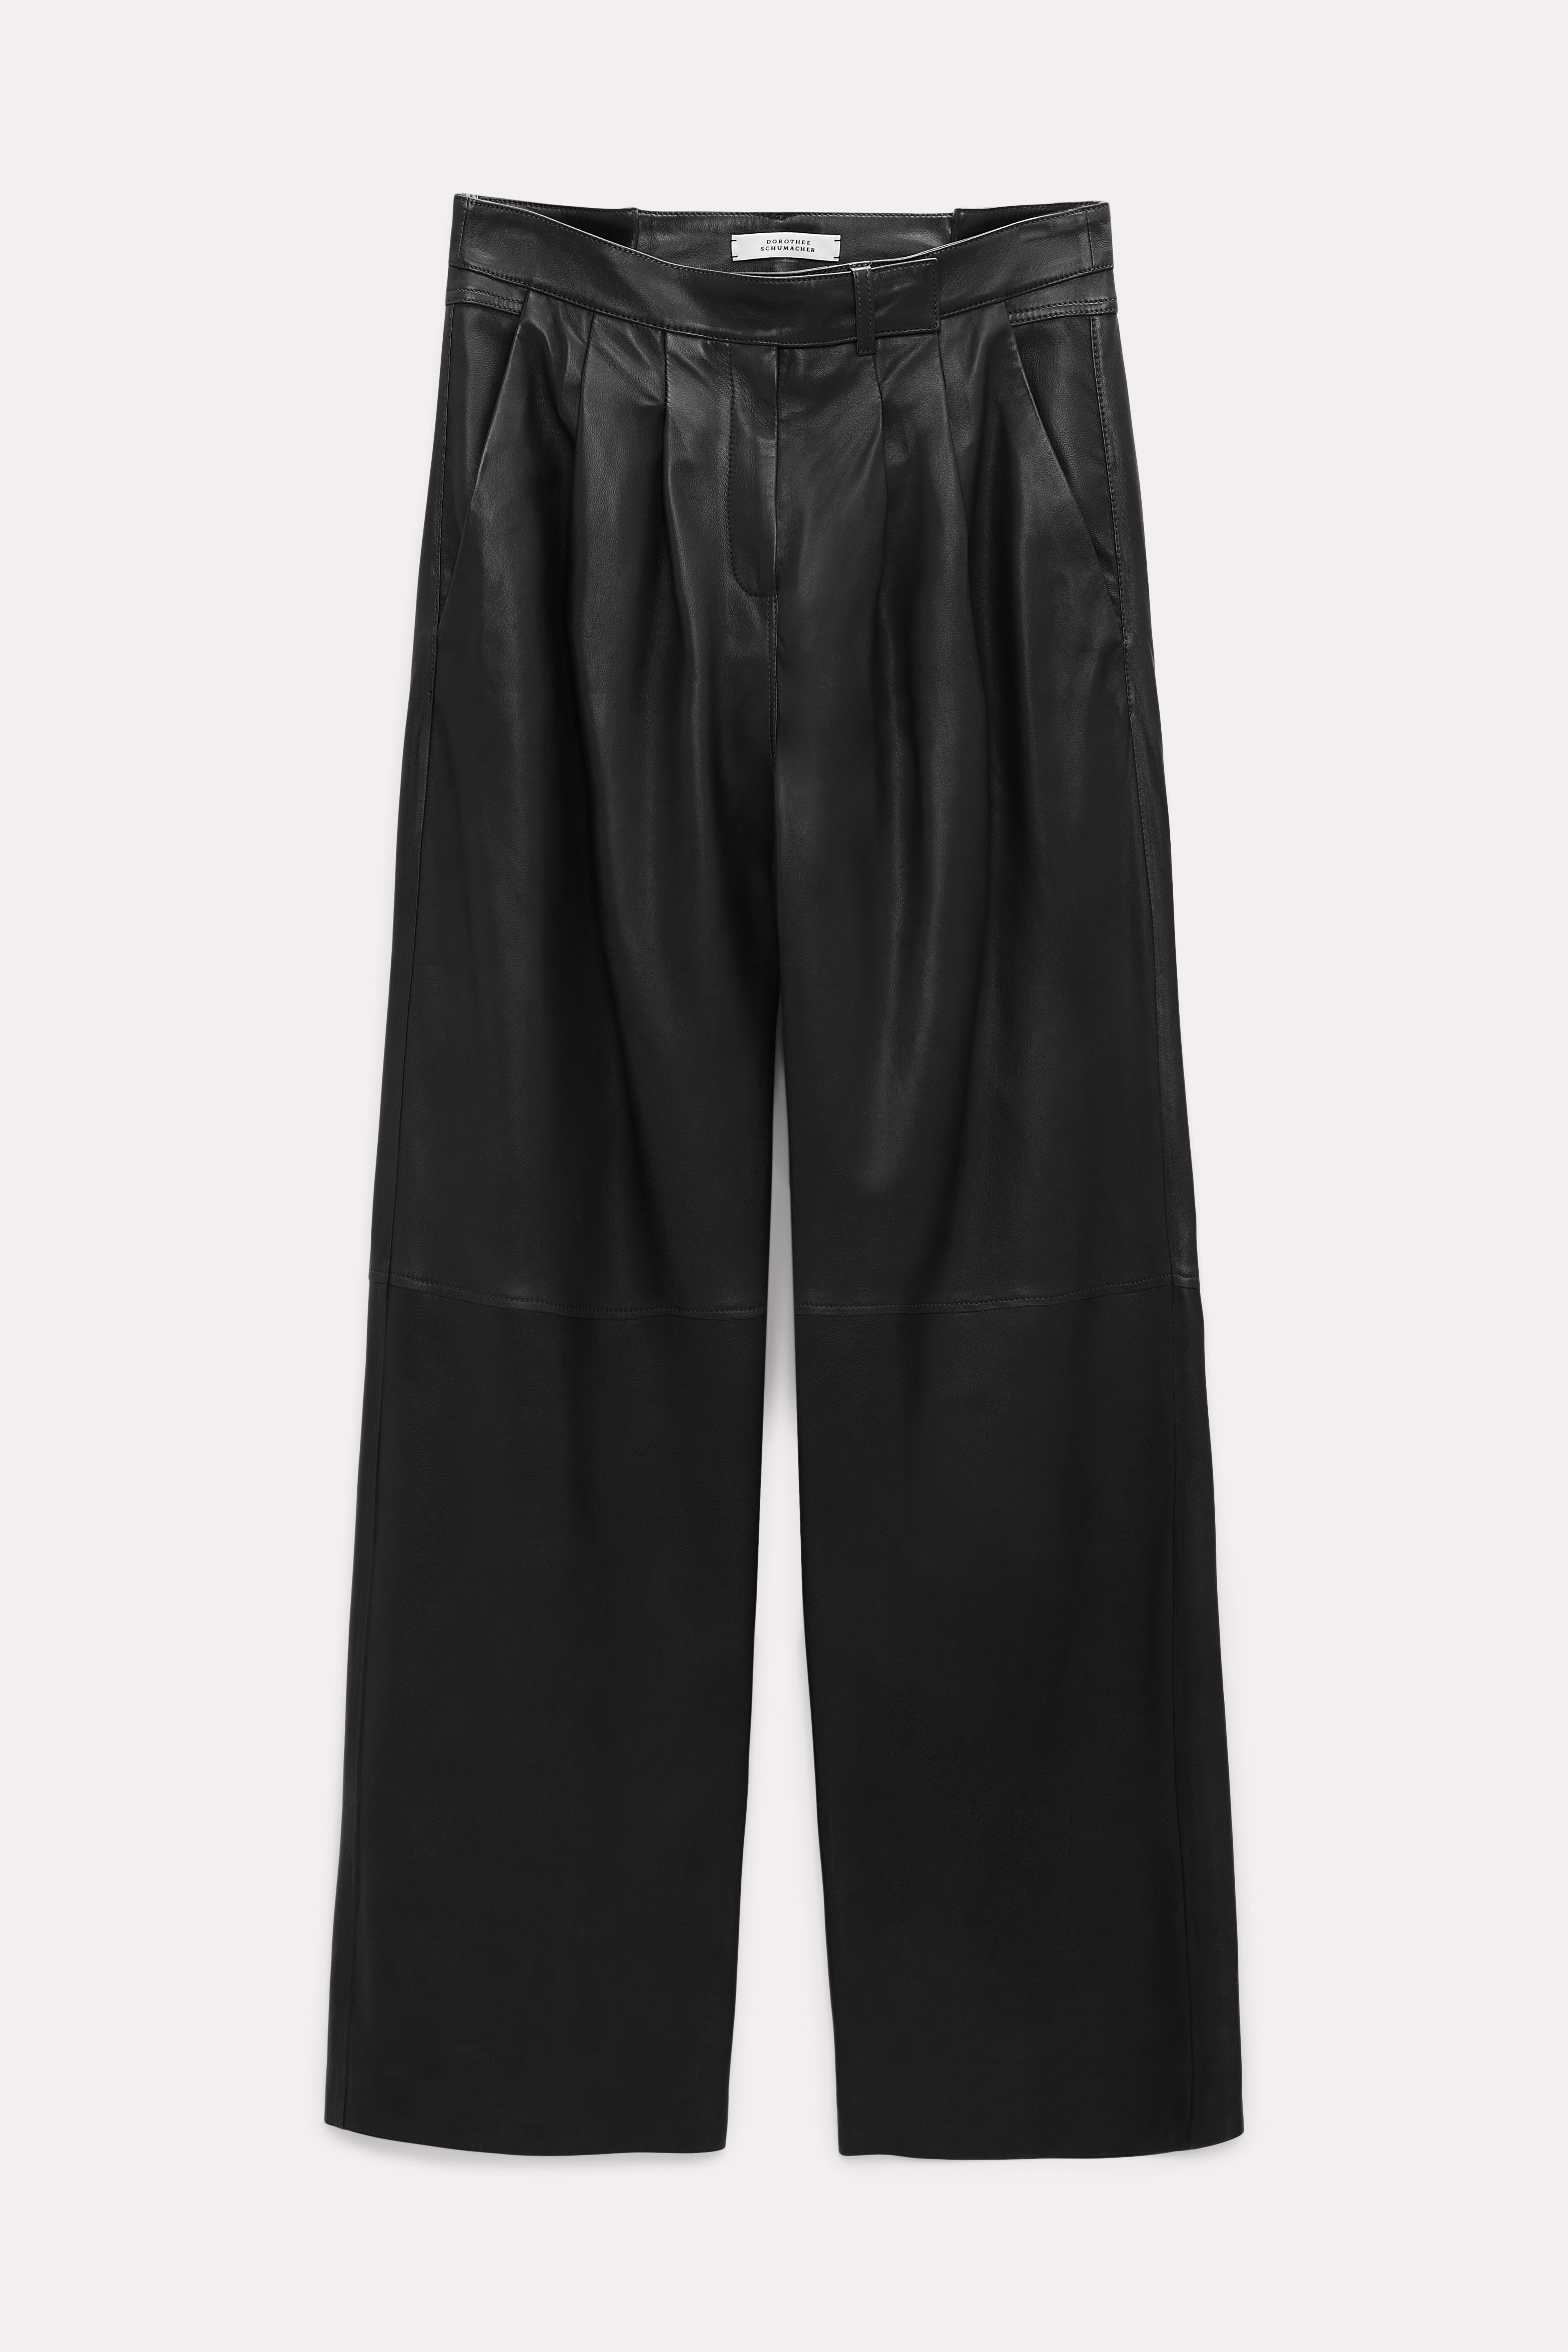 Dorothee-Schumacher-OUTLET-SALE-SOFT-TOUCH-pants-Hosen-ARCHIVE-COLLECTION_adbcd33a-096e-4aa7-b919-6e8d67831ff7.jpg